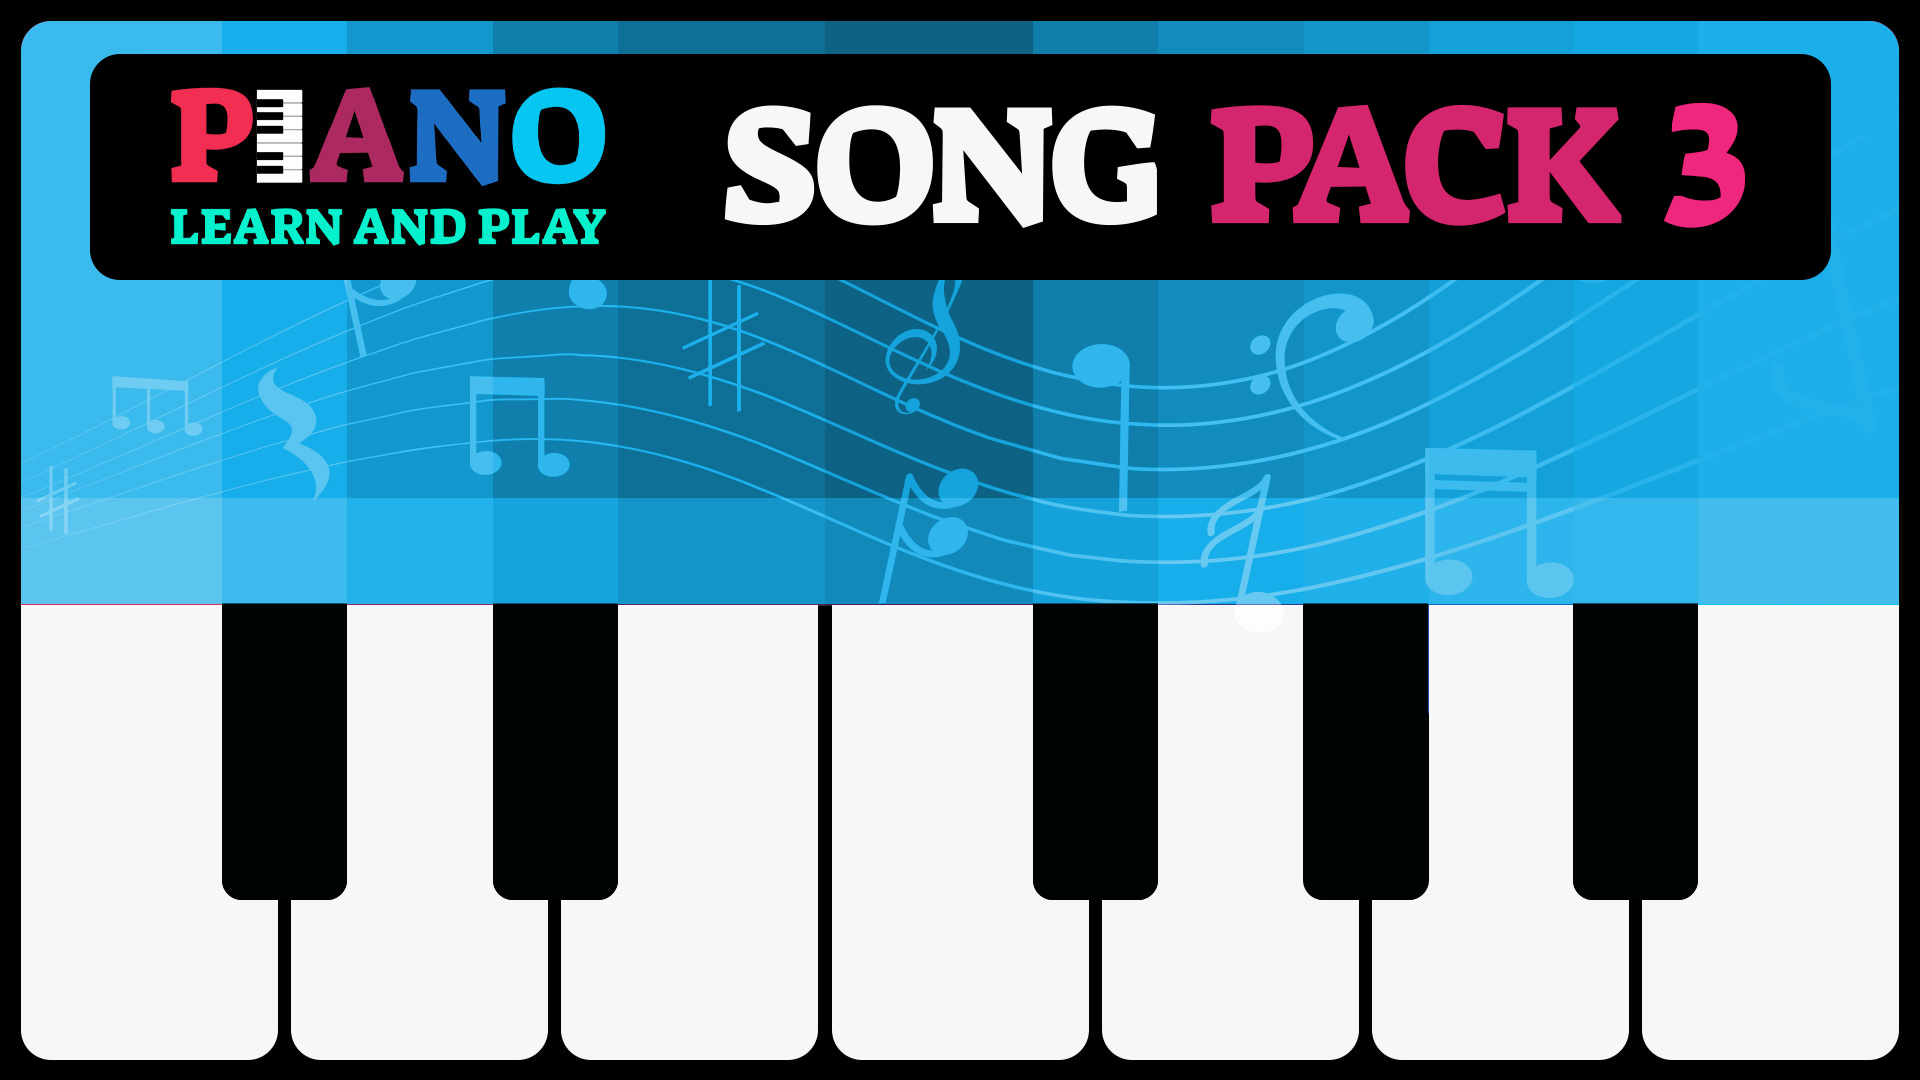 Song Pack 3